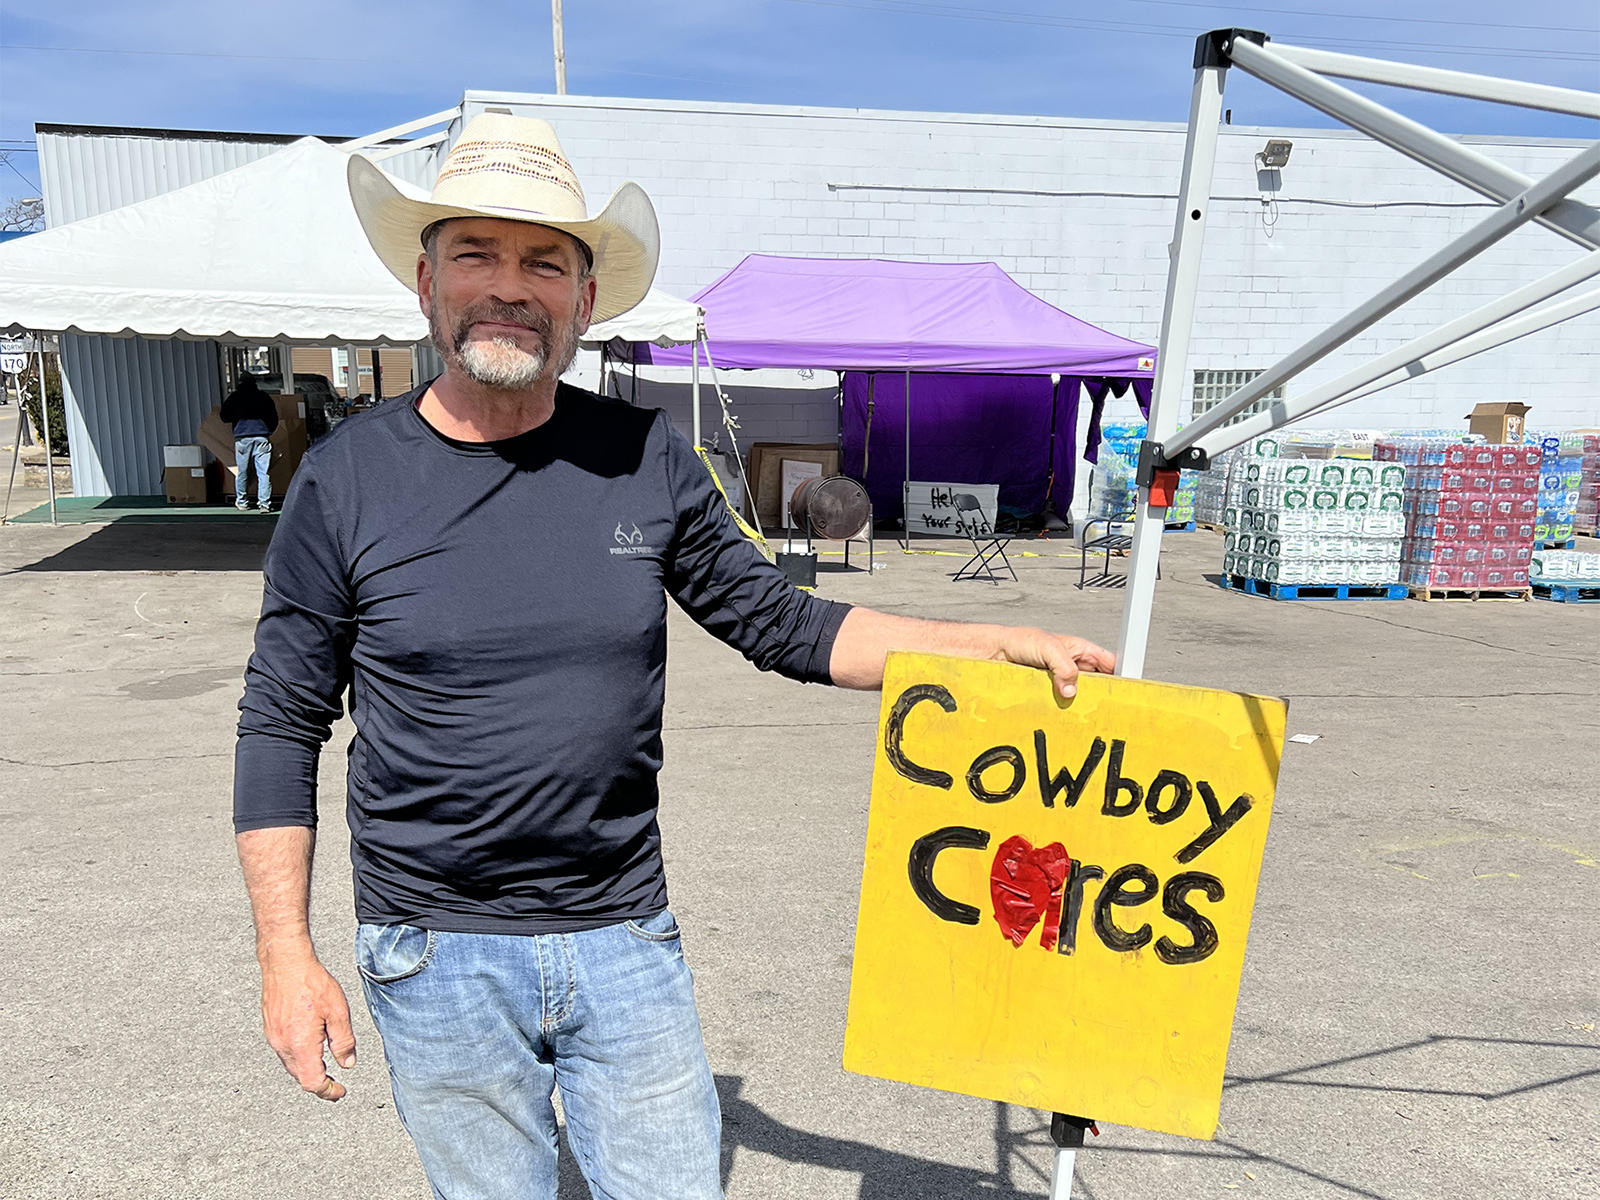 David Graham poses with a Cowboy Cares sign near water to be distributed in East Palestine, Ohio, on Tuesday, March 21, 2023. RNS photo by Kathryn Post